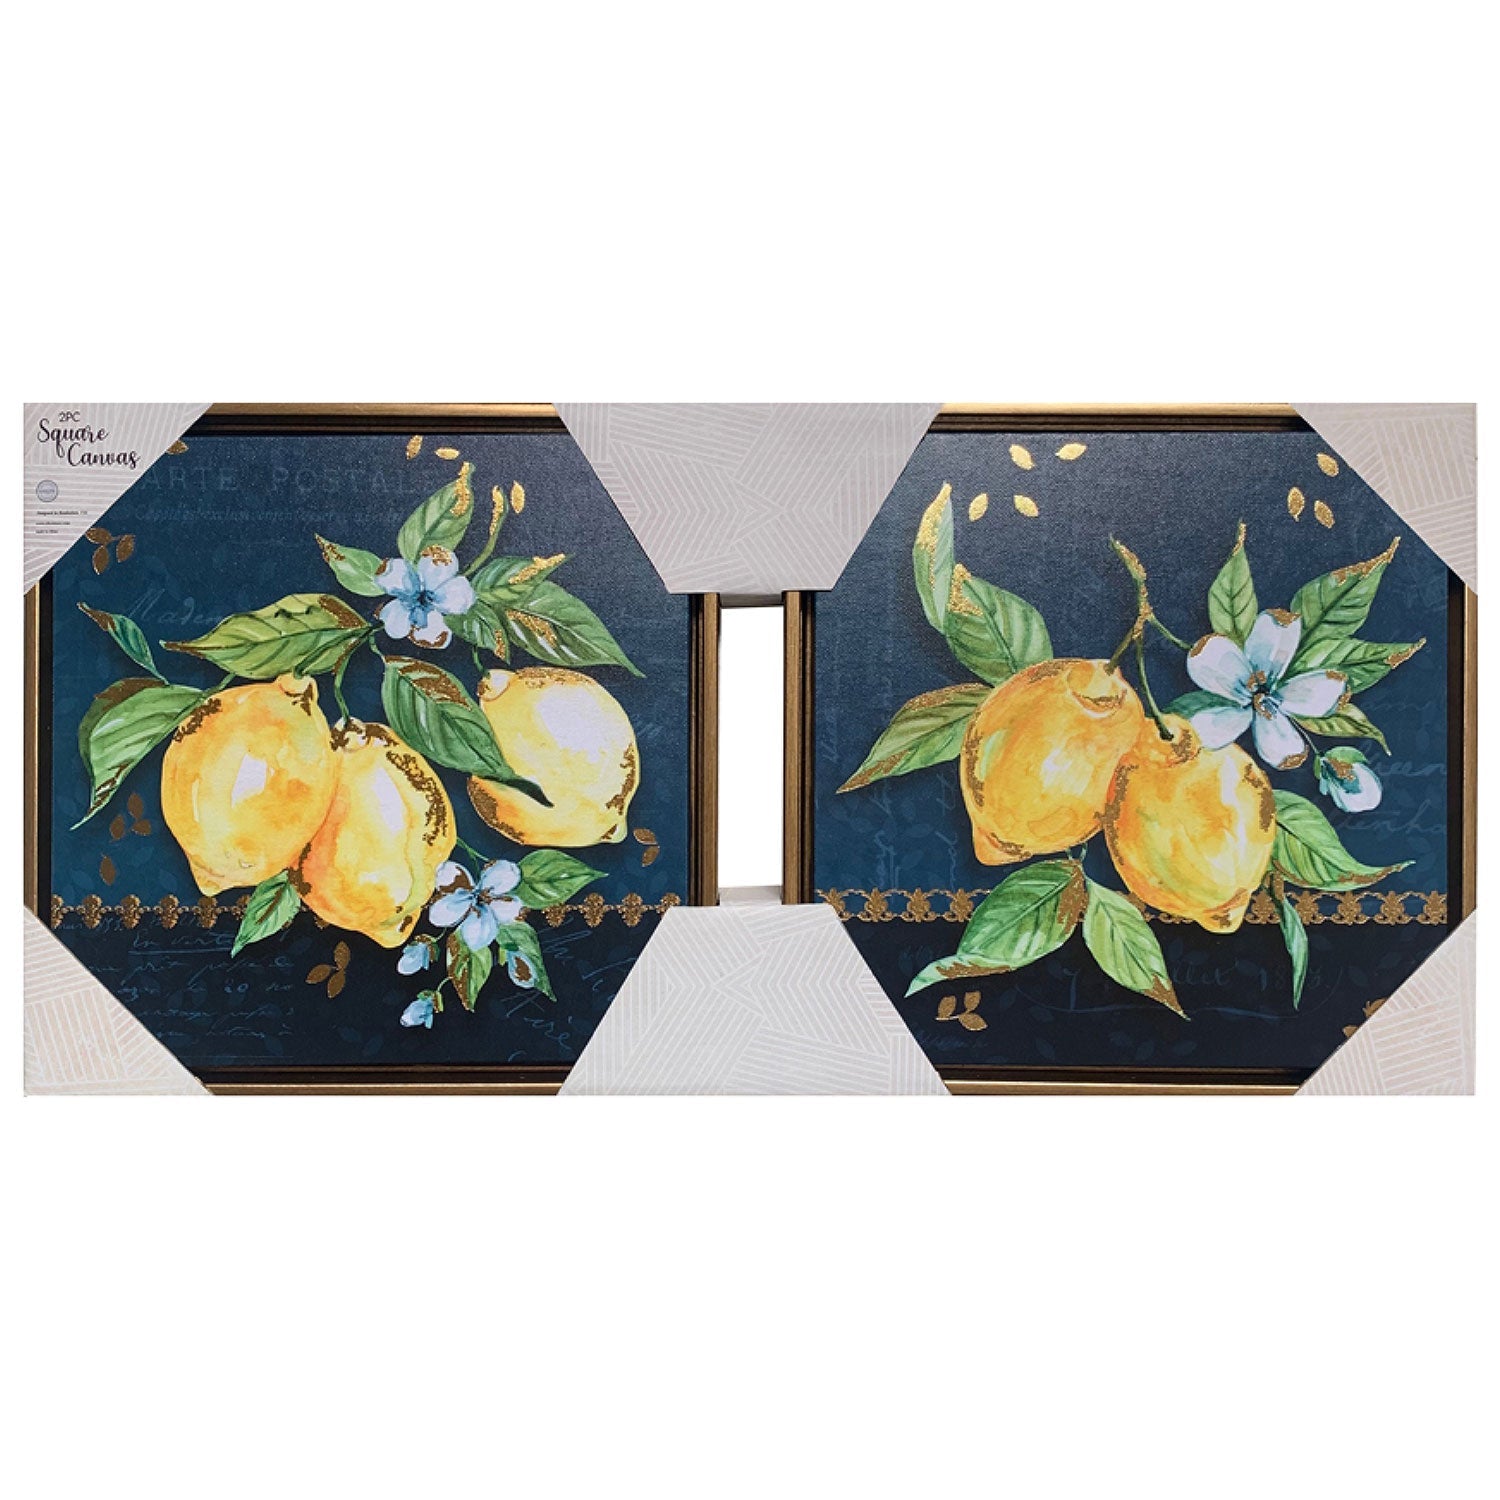 PREMIUS 2 Piece Lemon with Leaves Framed Canvas Wall Art Set, 12x12 Inches